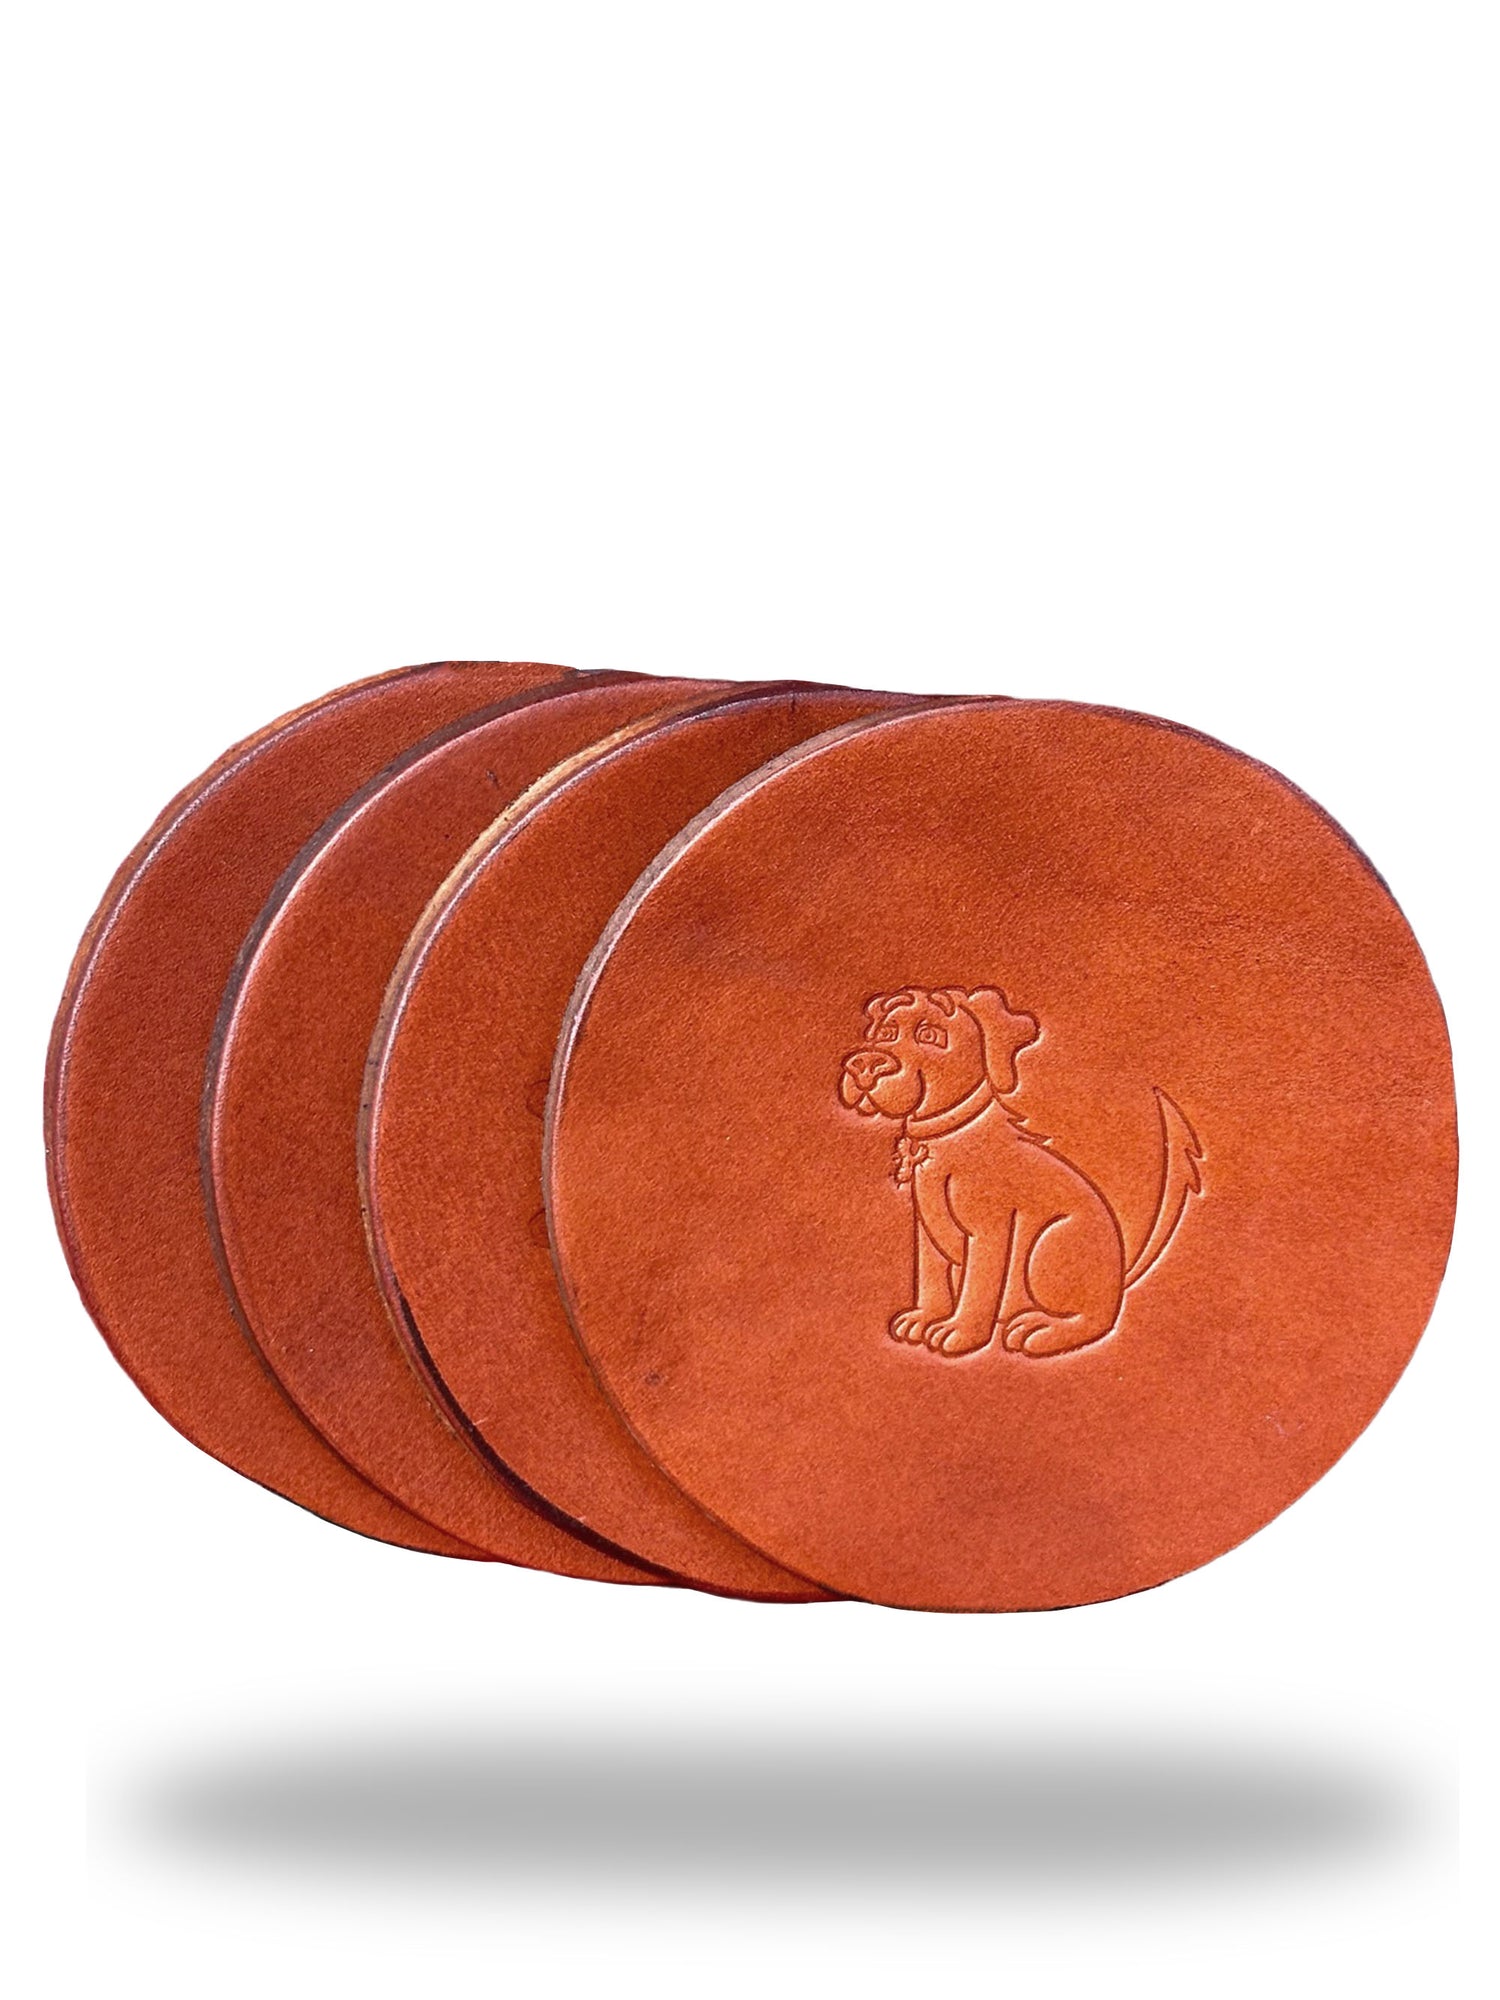 Round Leather Coasters with Dog Design - Set of 4